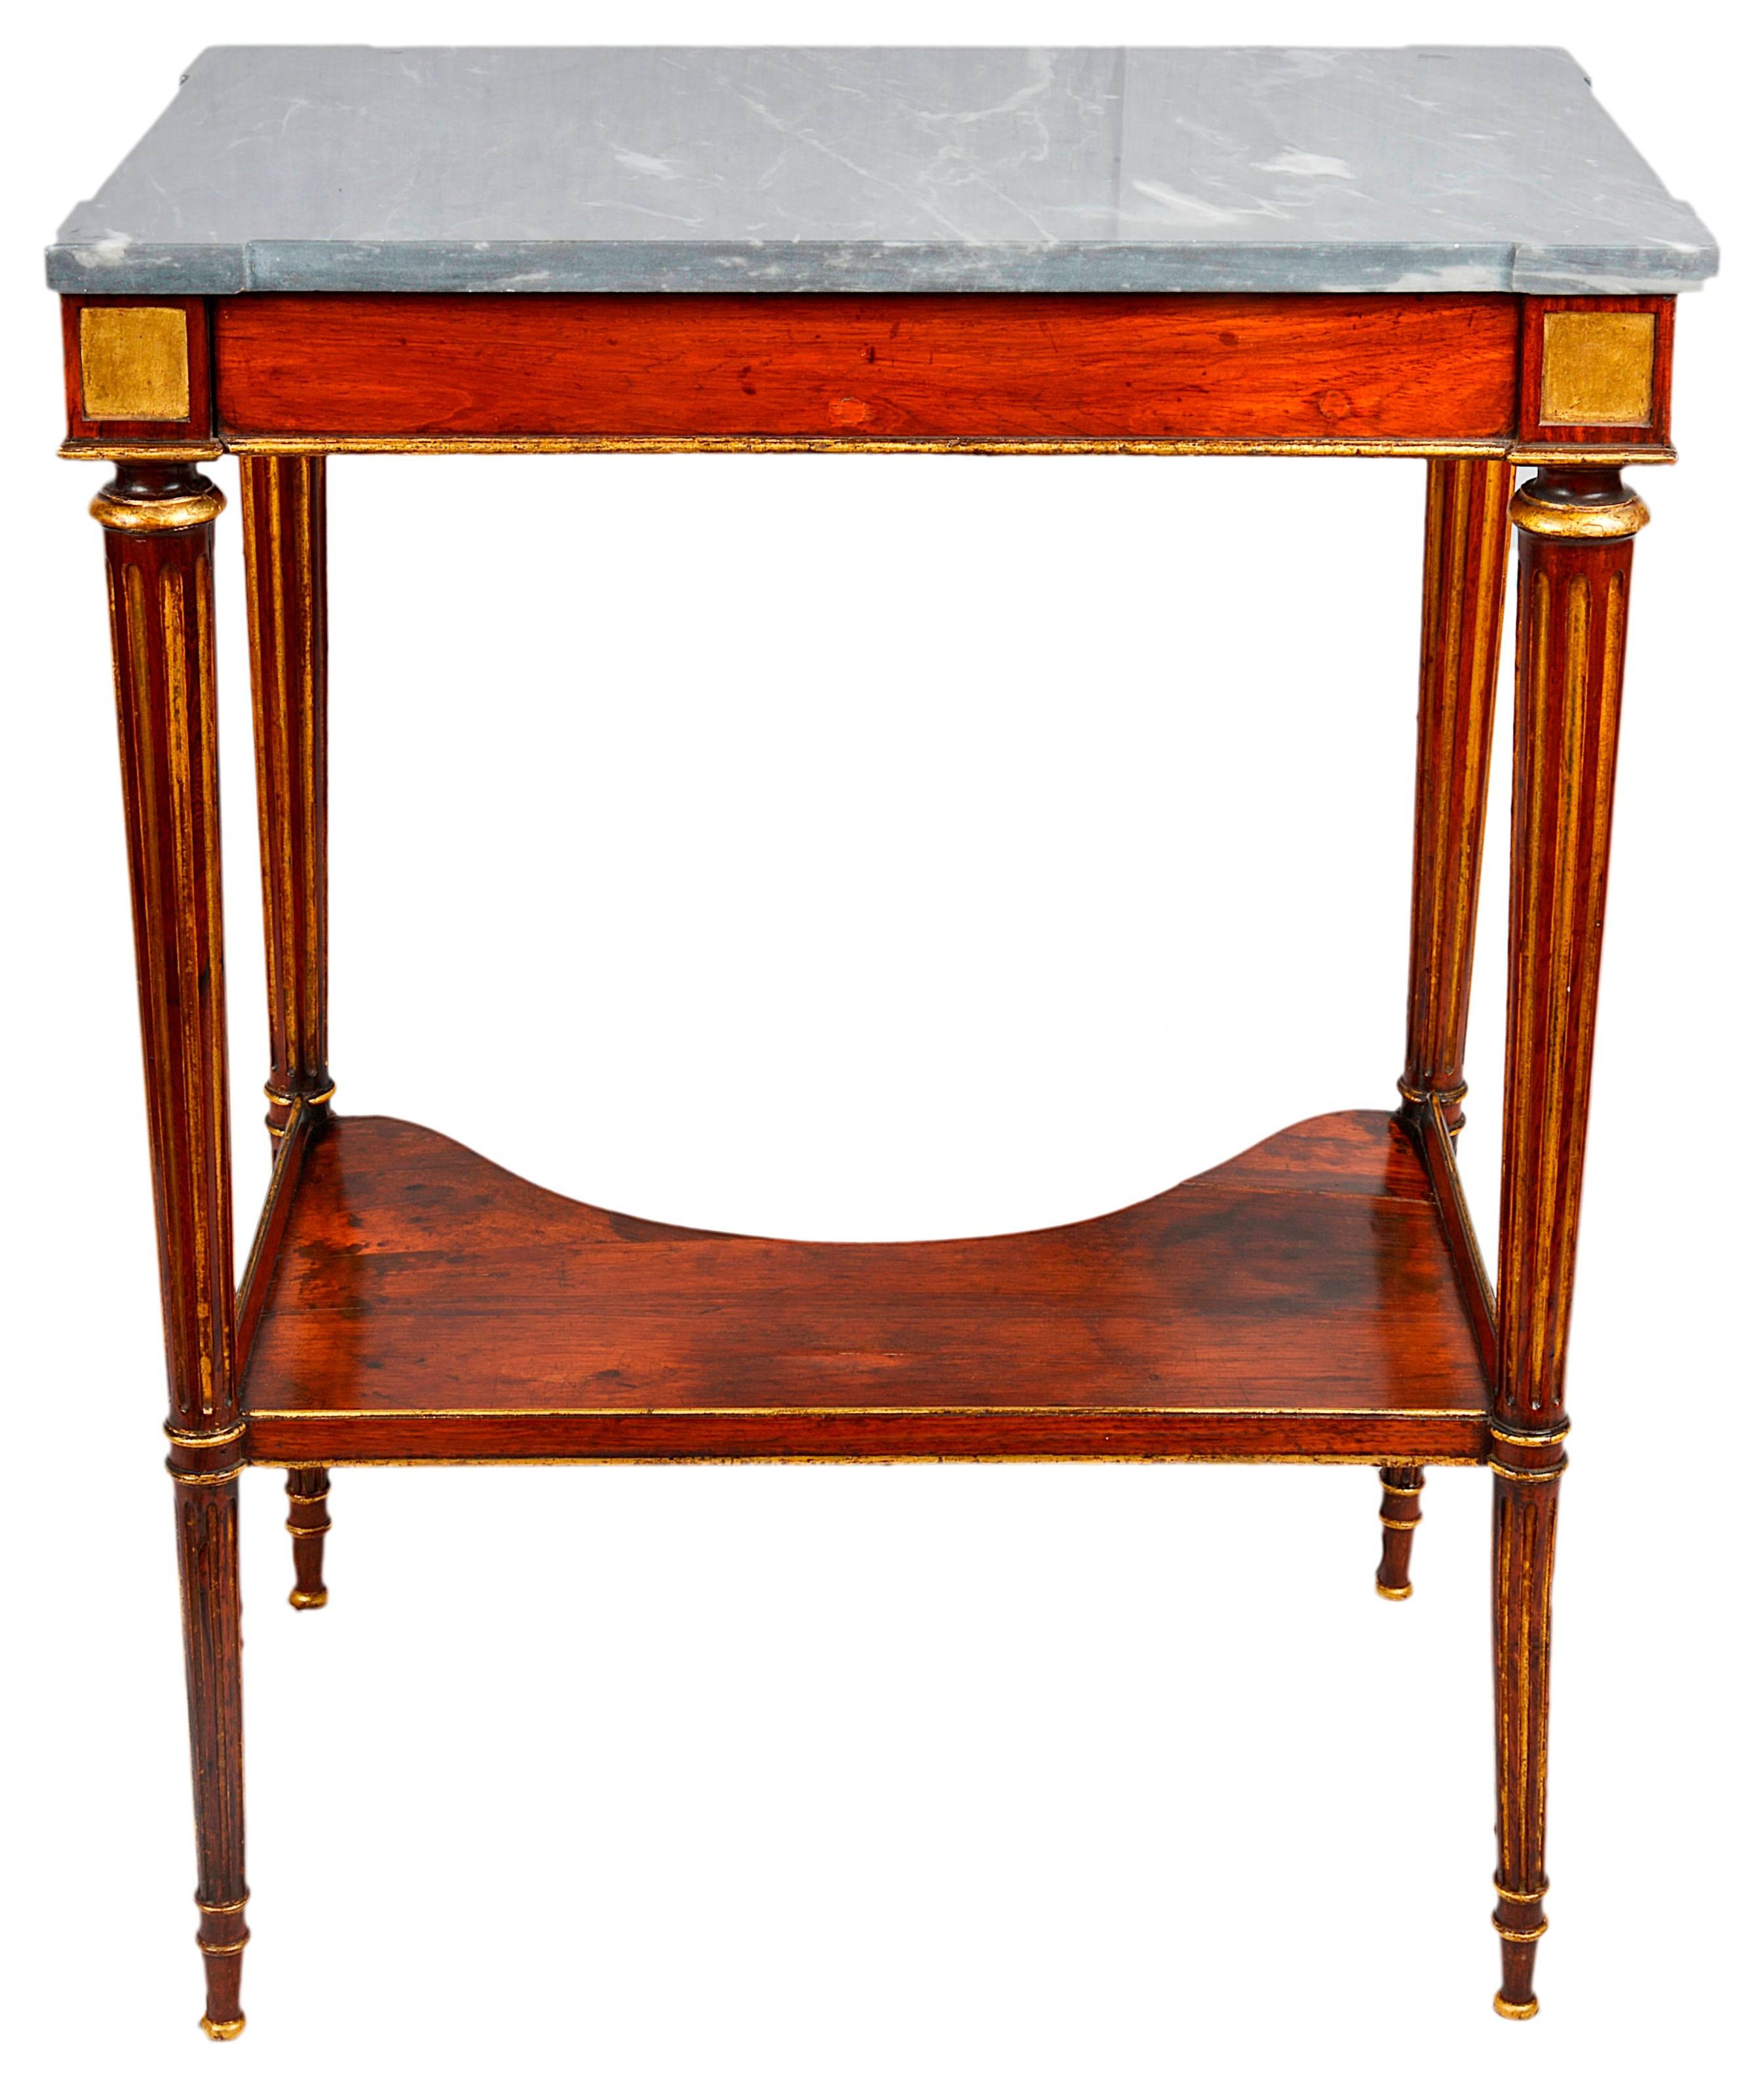 English Regency Period Side Table, circa 1820 For Sale